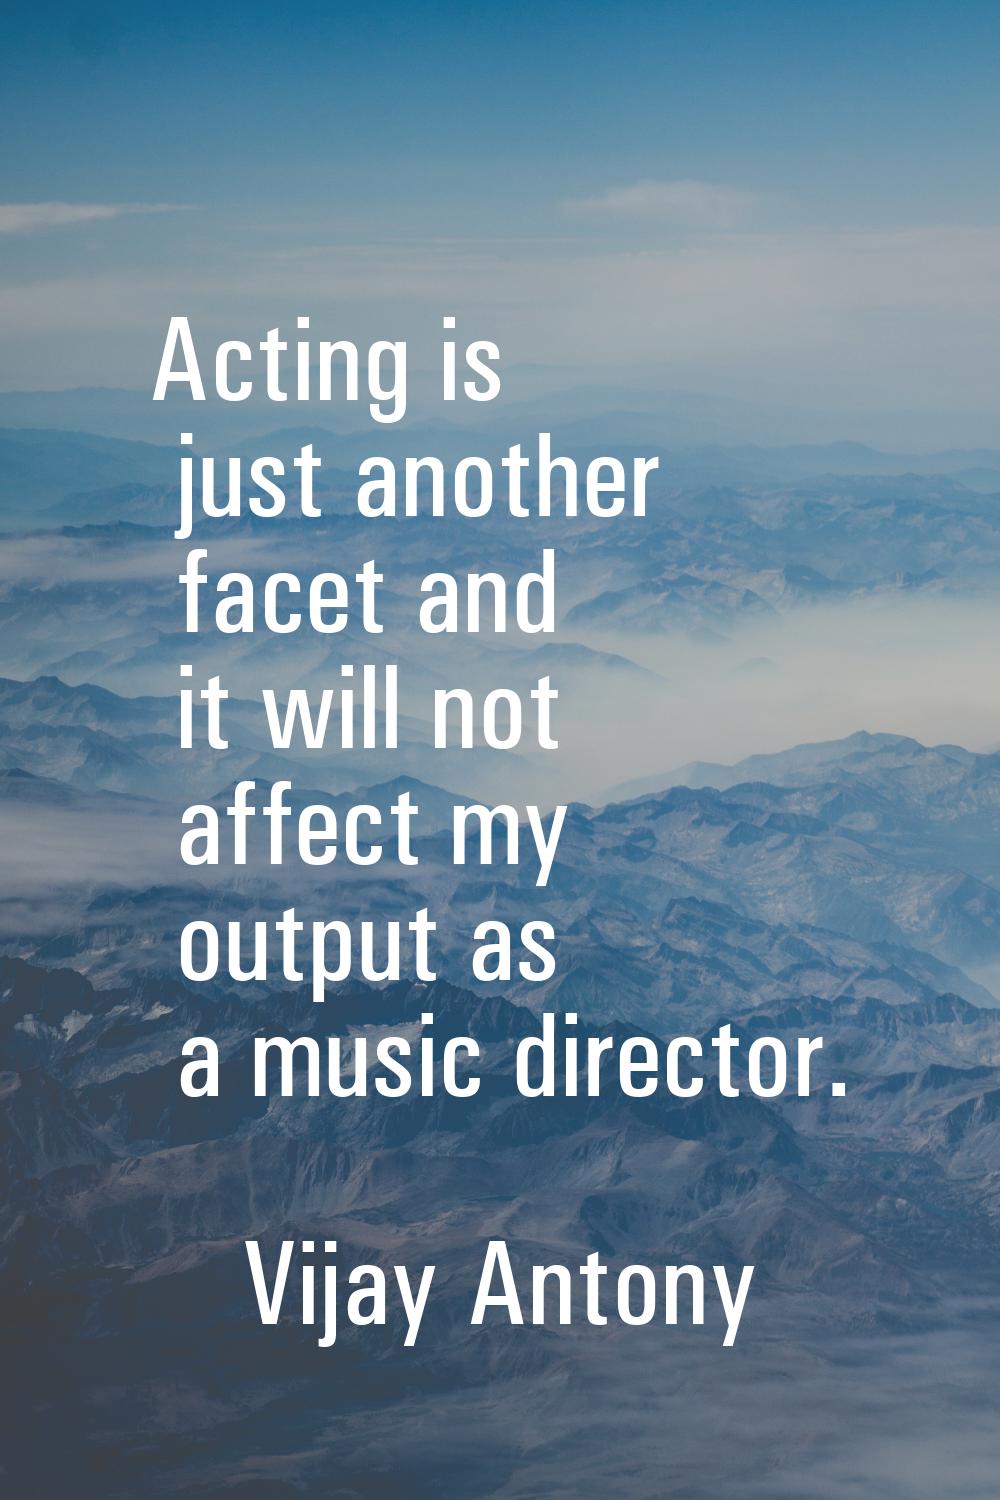 Acting is just another facet and it will not affect my output as a music director.